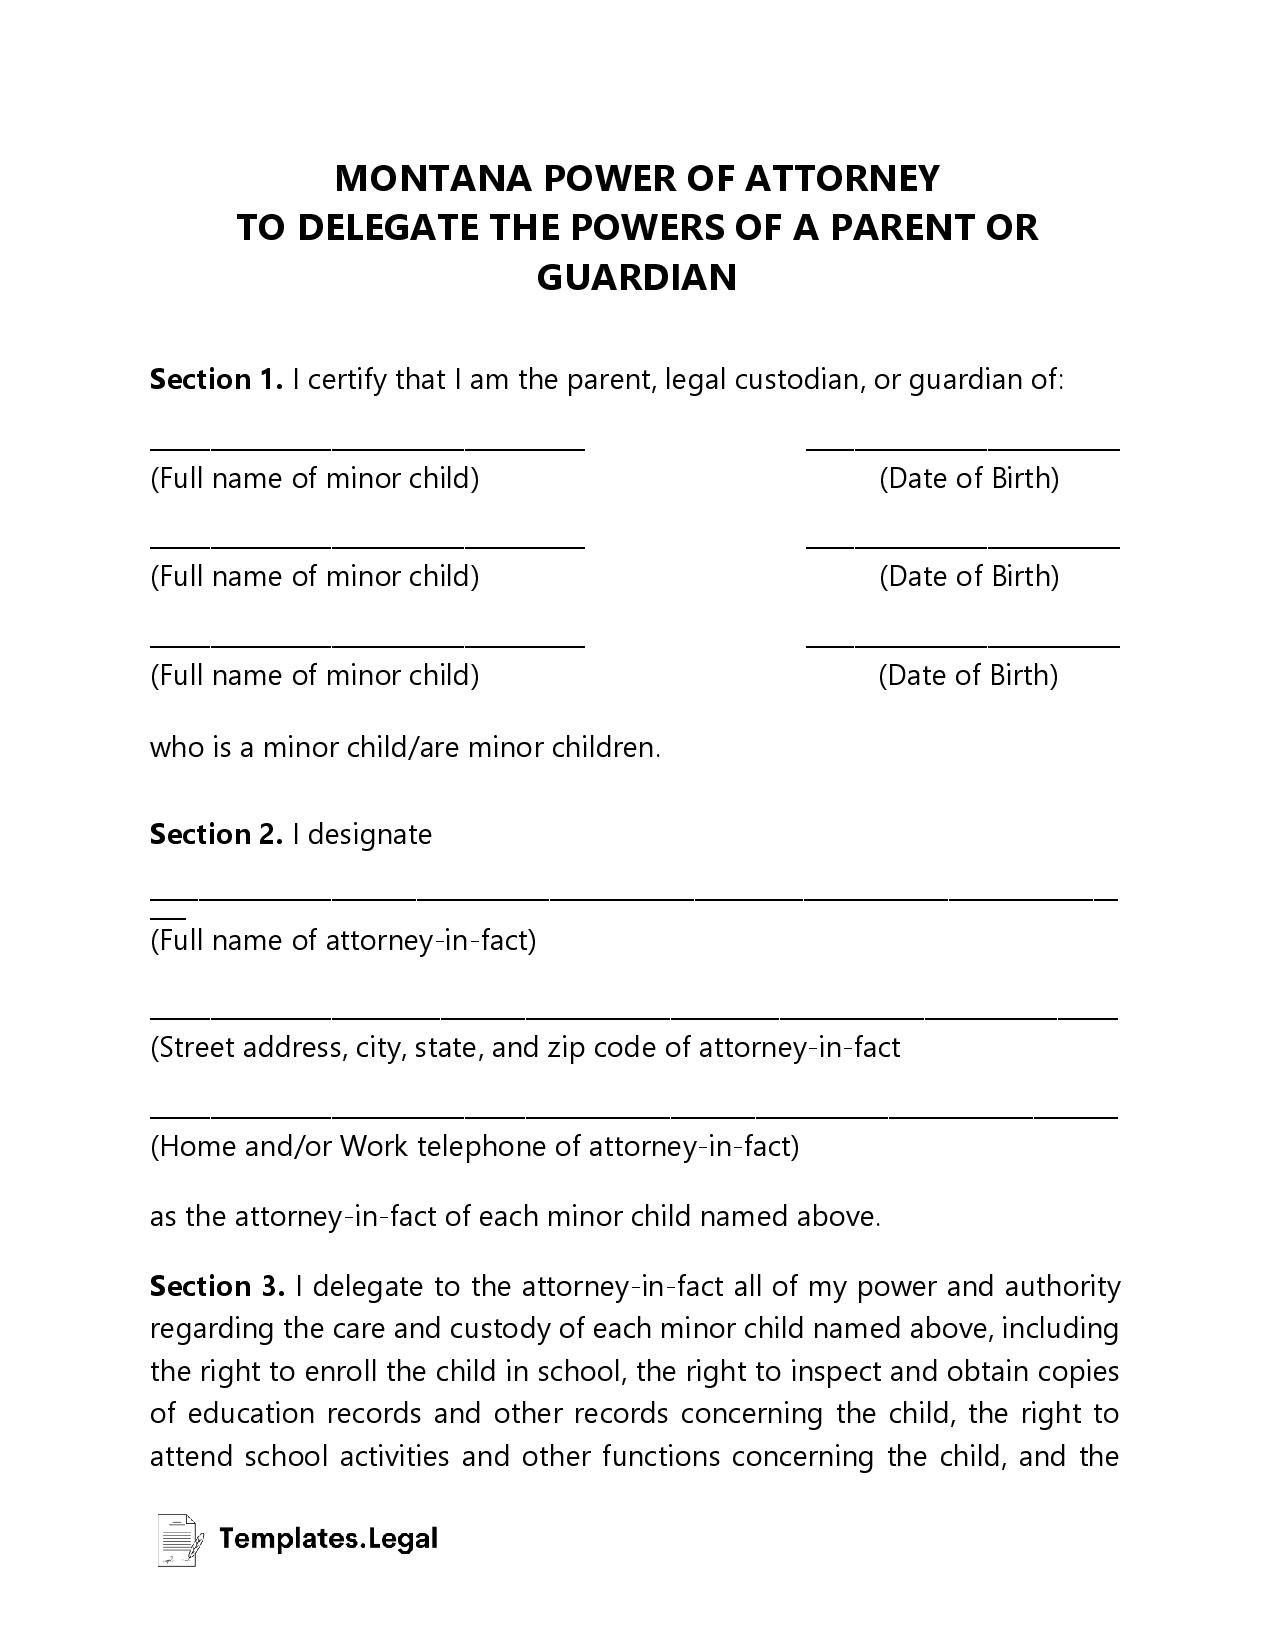 Montana Minor (Child) Power of Attorney - Templates.Legal